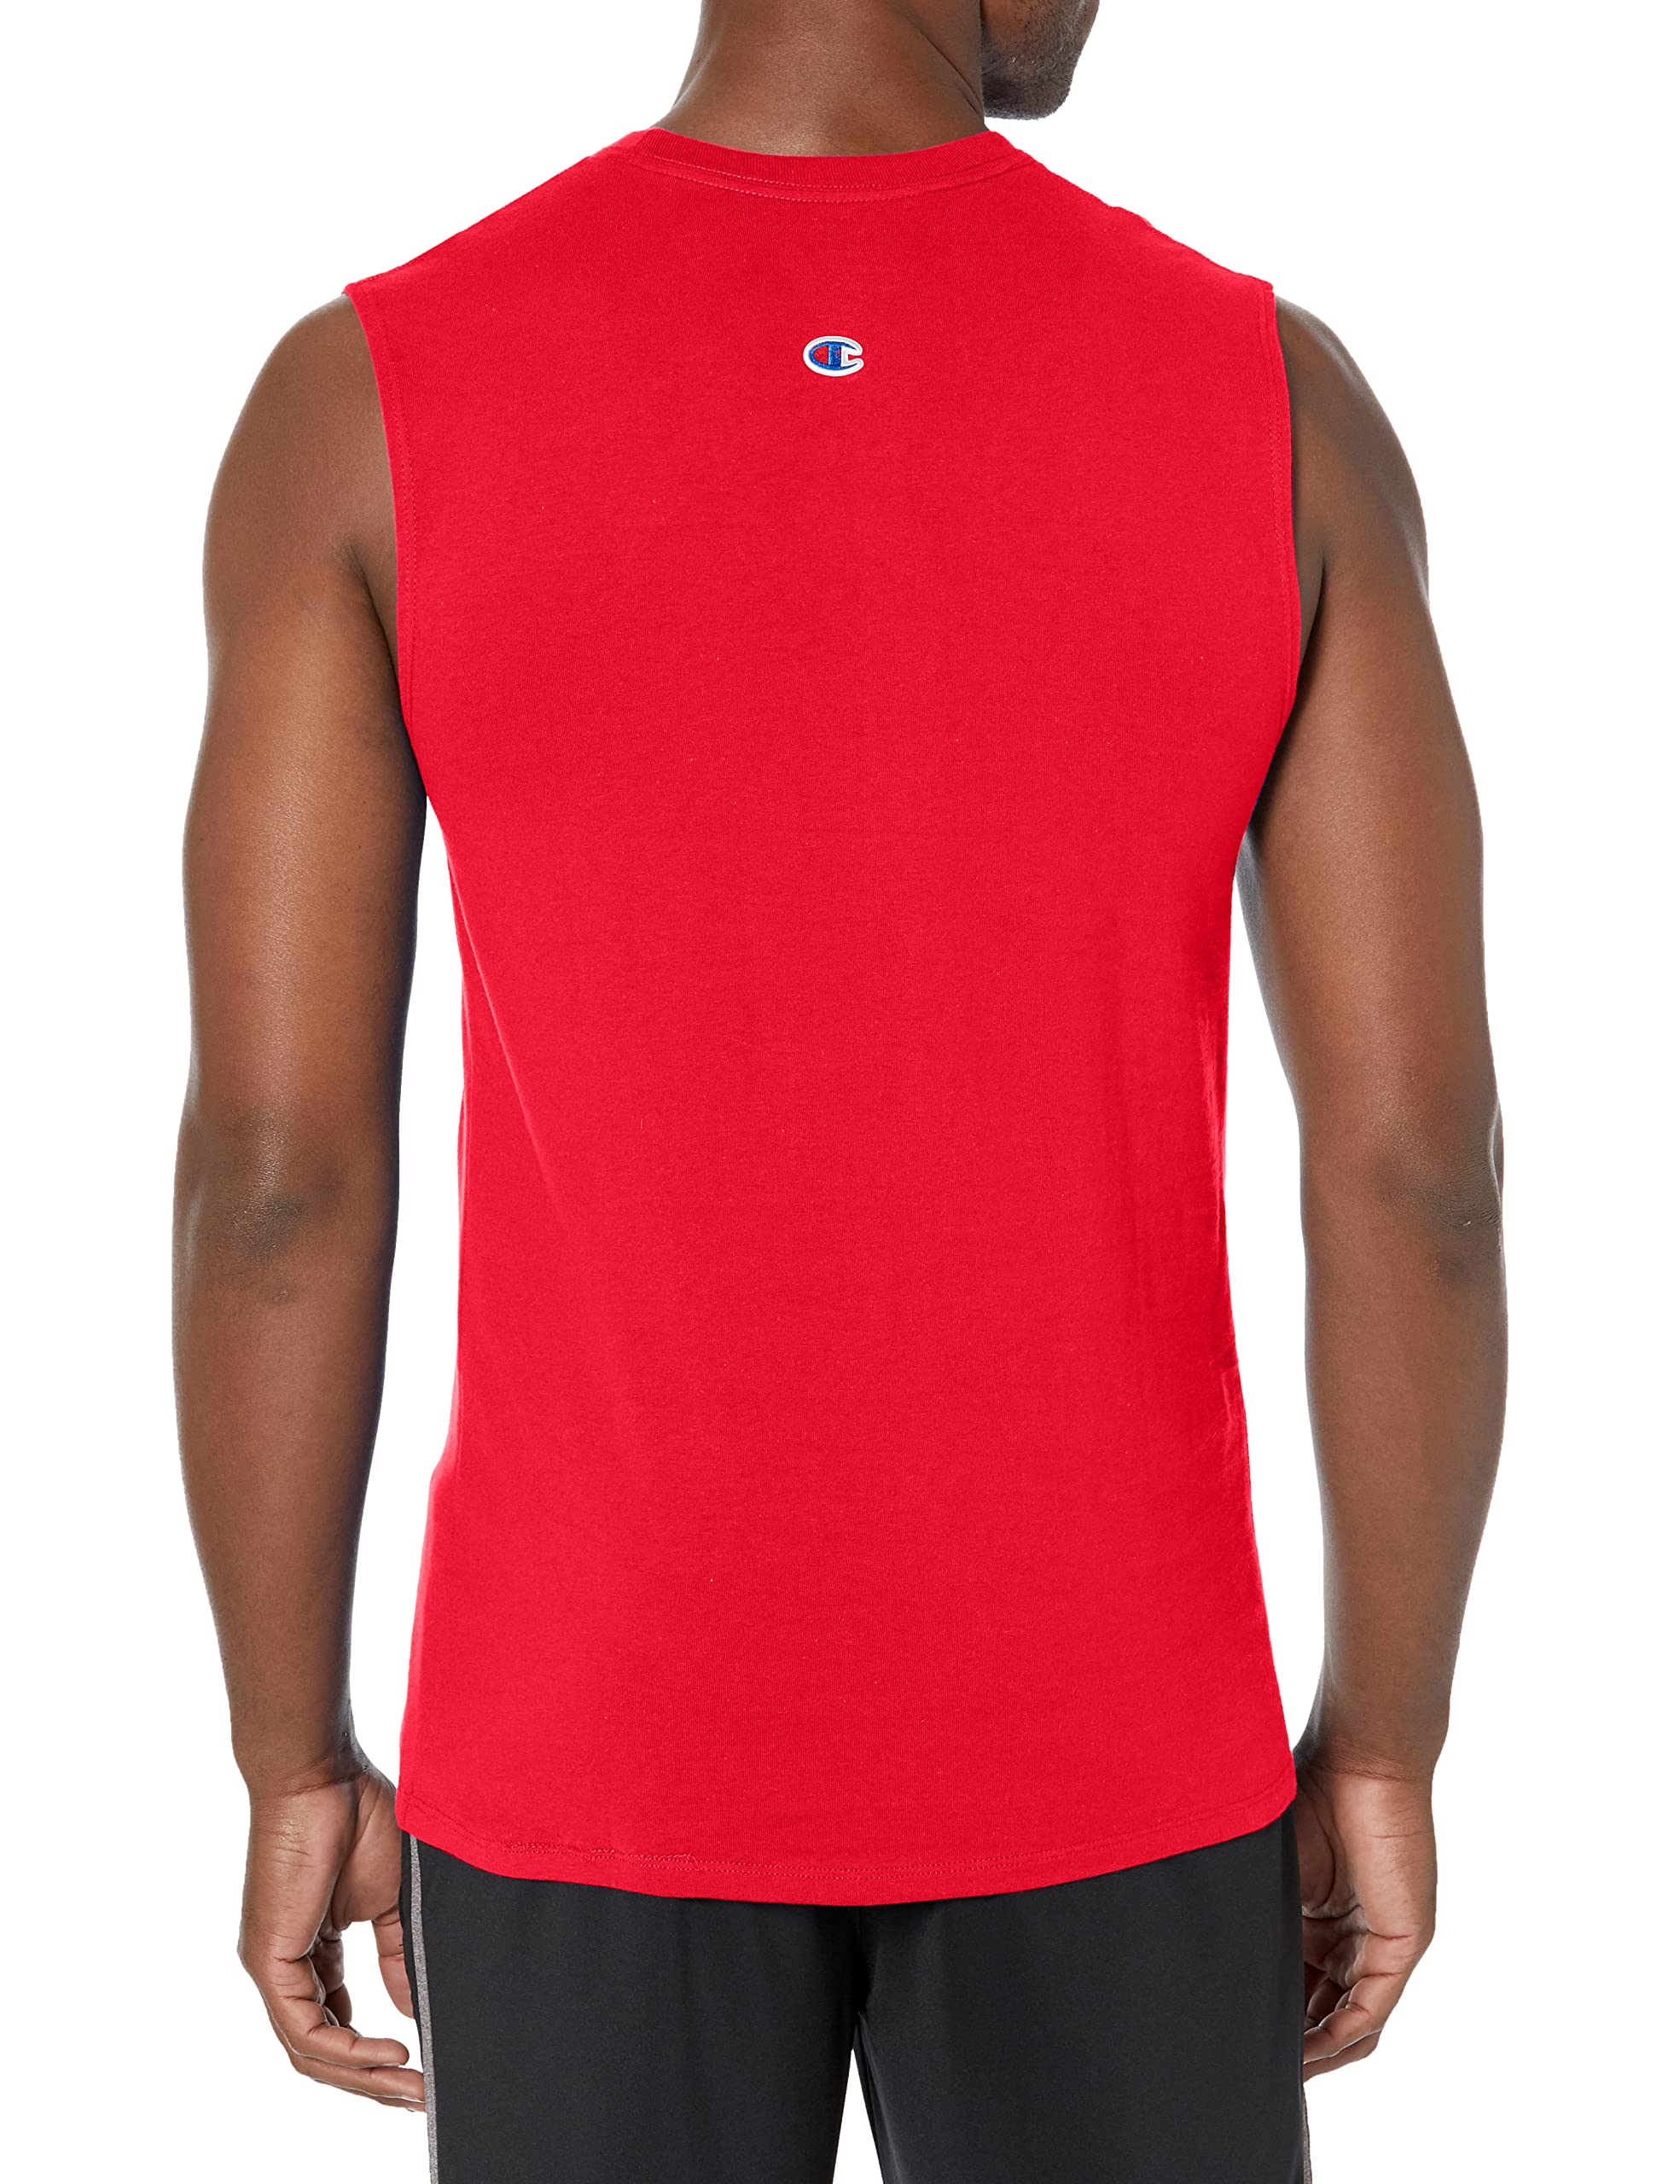 Champion Mens Classic Cotton Muscle Tee, Pure Cotton Muscle T-Shirt, Basic Muscle Tee for Men